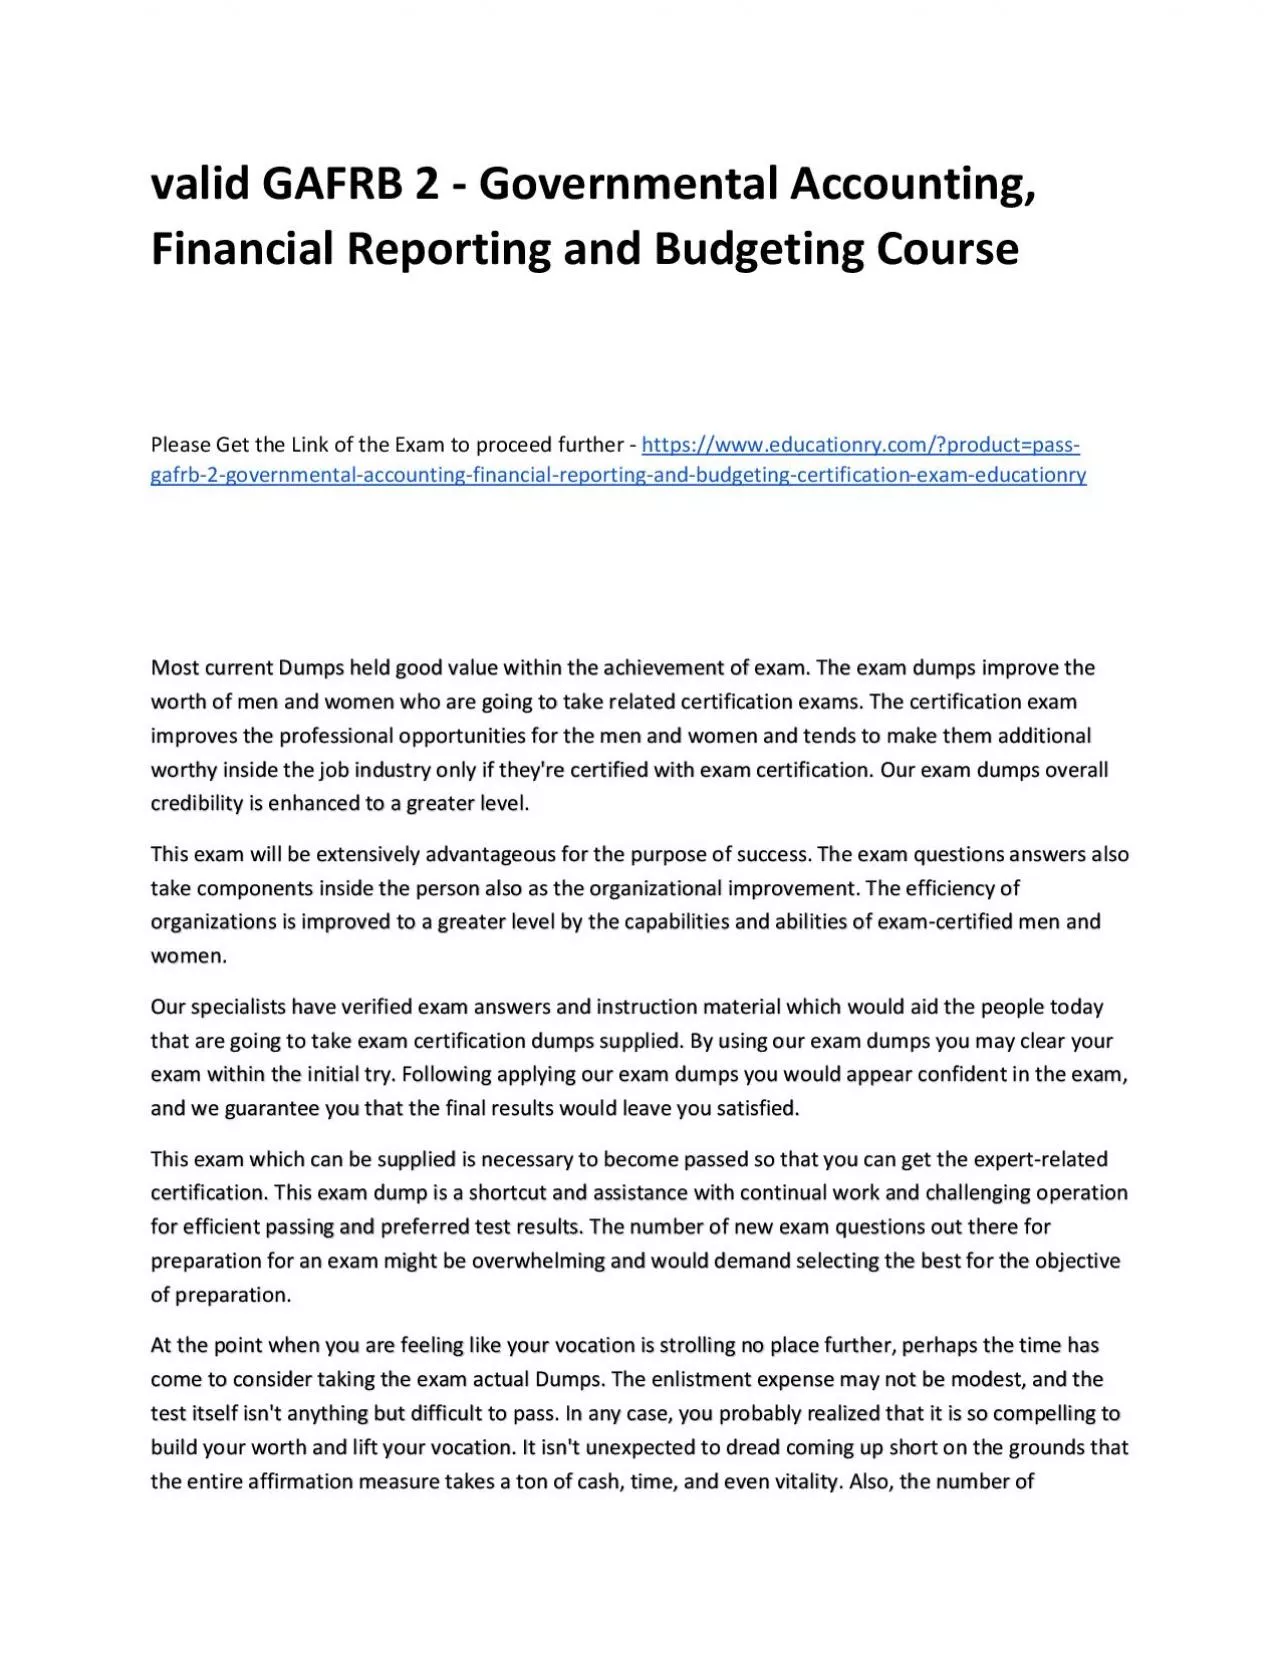 Valid GAFRB 2 - Governmental Accounting, Financial Reporting and Budgeting Practice Course